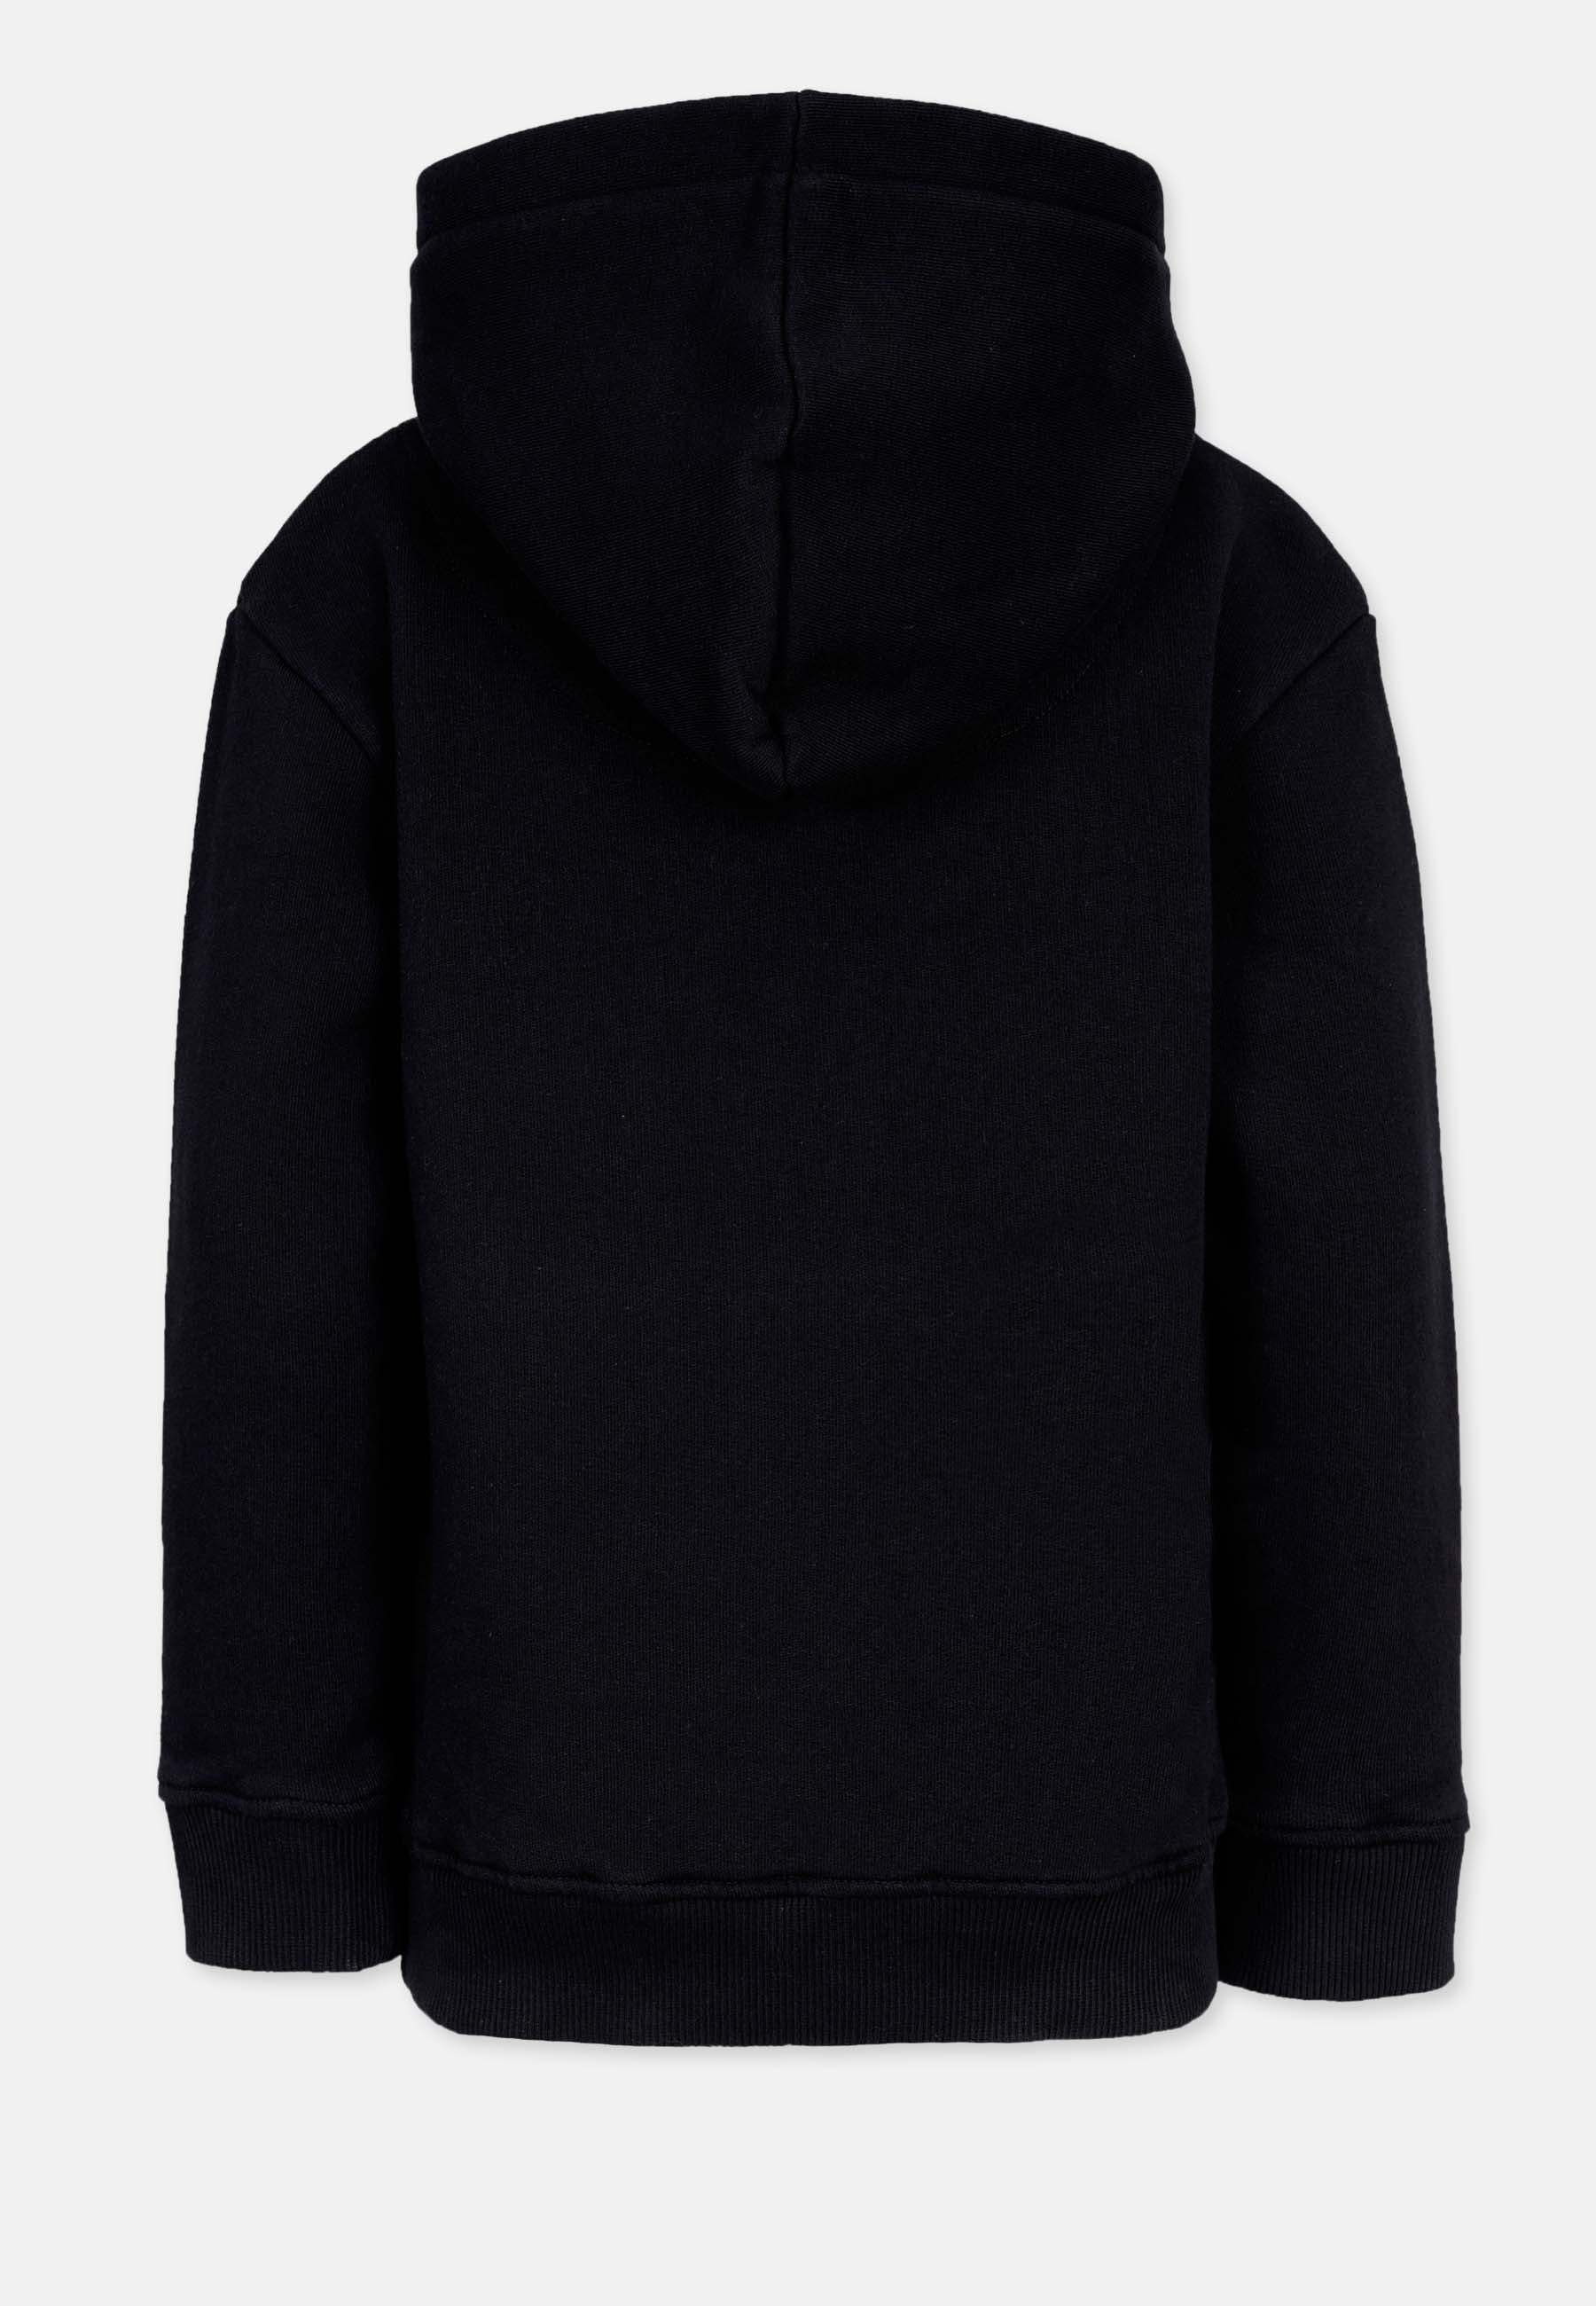 Frequency Hooded